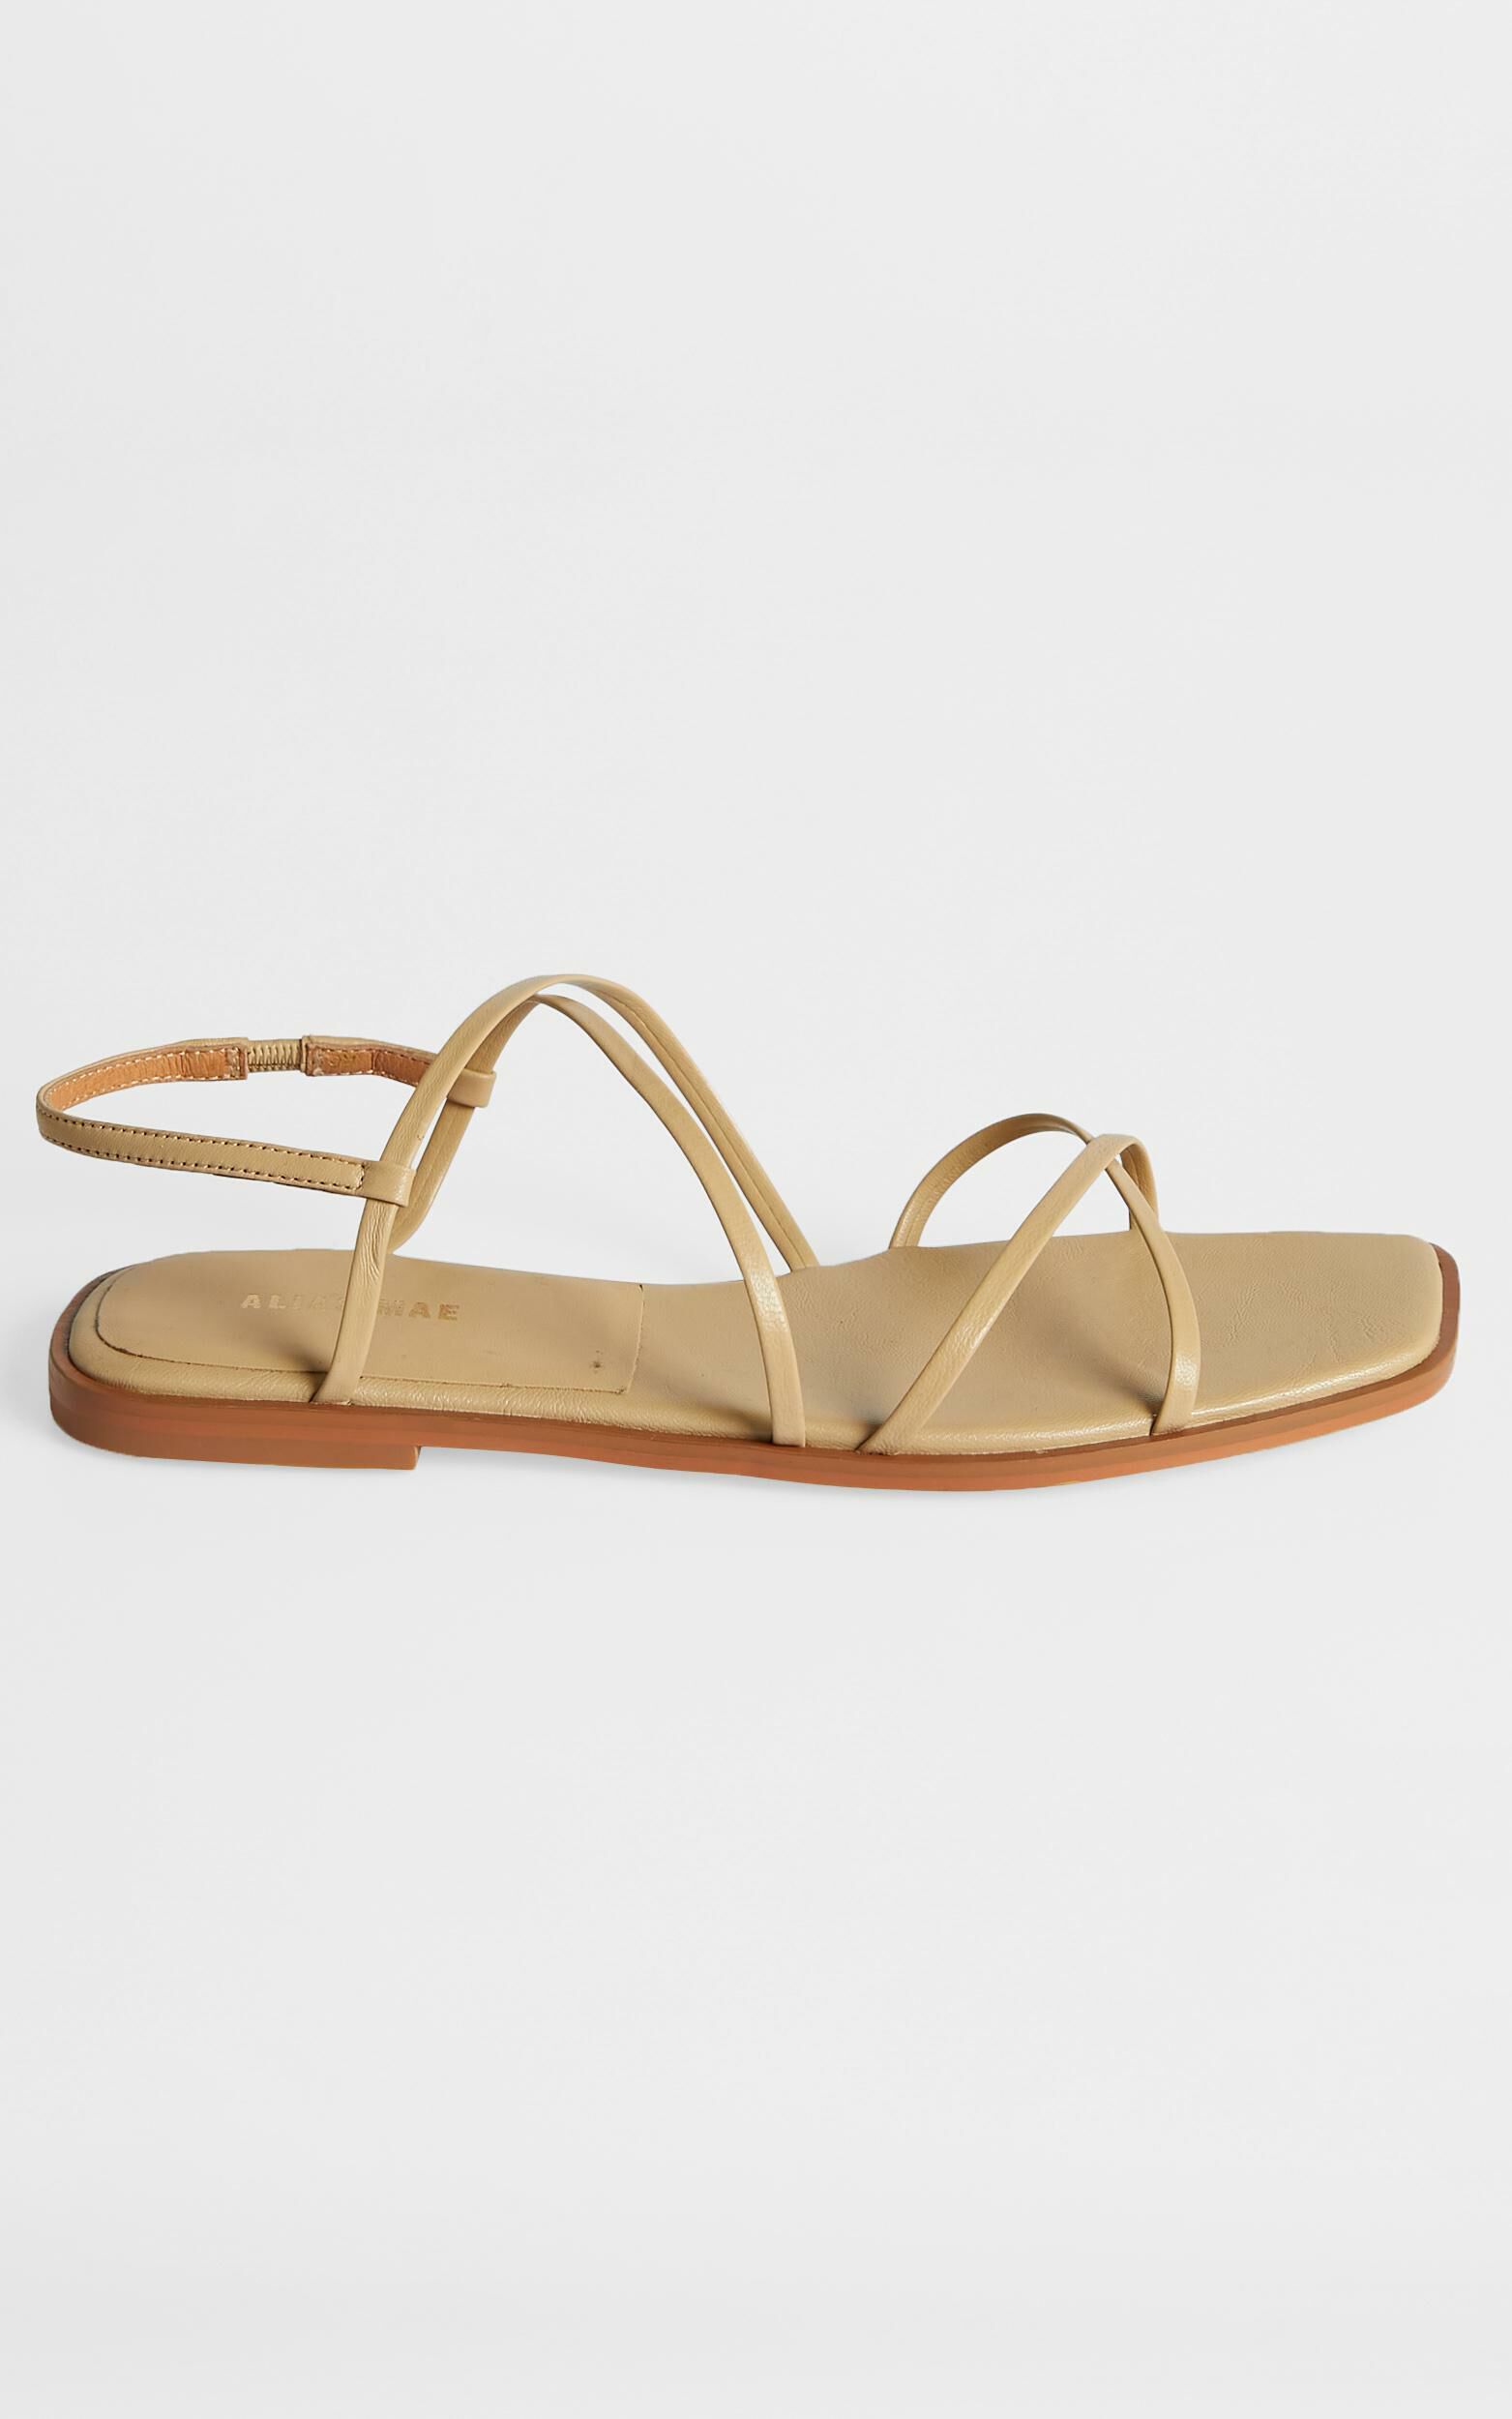 Alias Mae - Tulin Sandals in Natural Leather - 5.5, BRN2